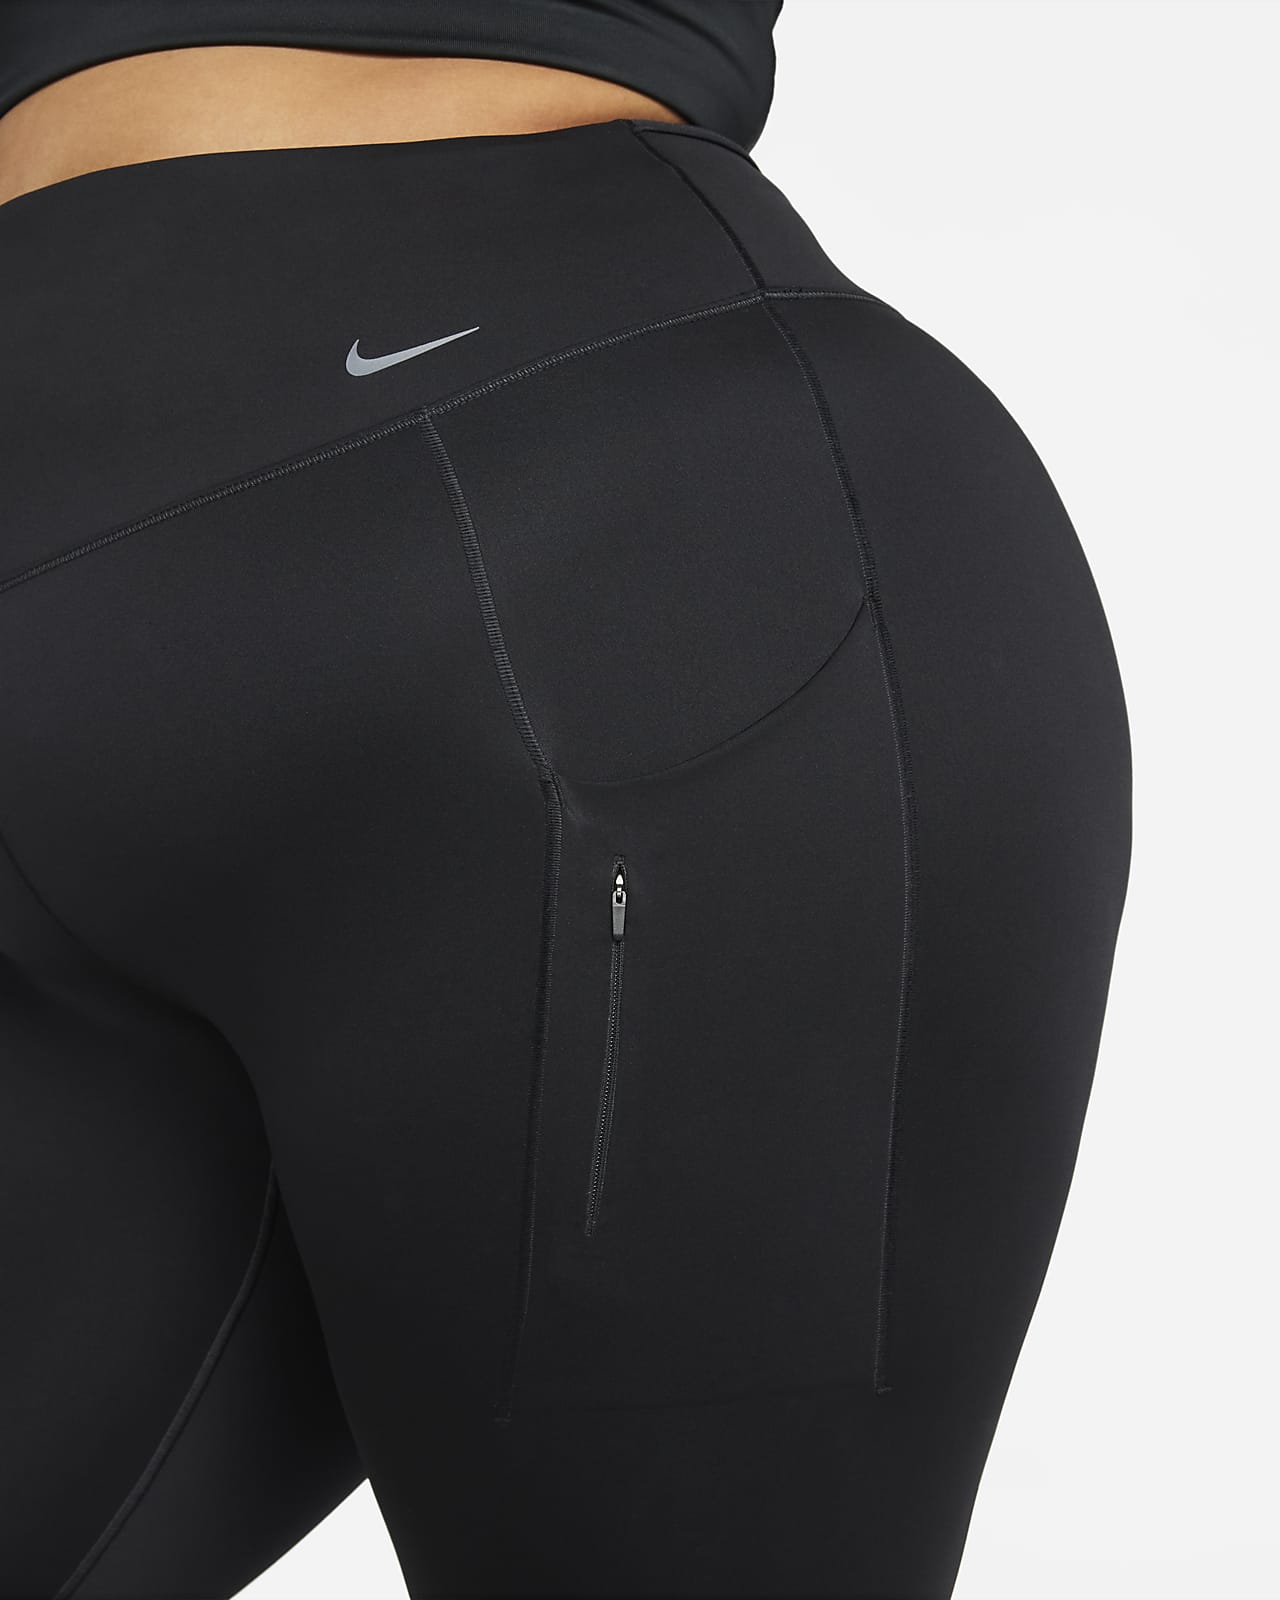 Nike Go Women's Firm-Support High-Waisted 7/8 Leggings with Pockets (Plus  Size). Nike MY